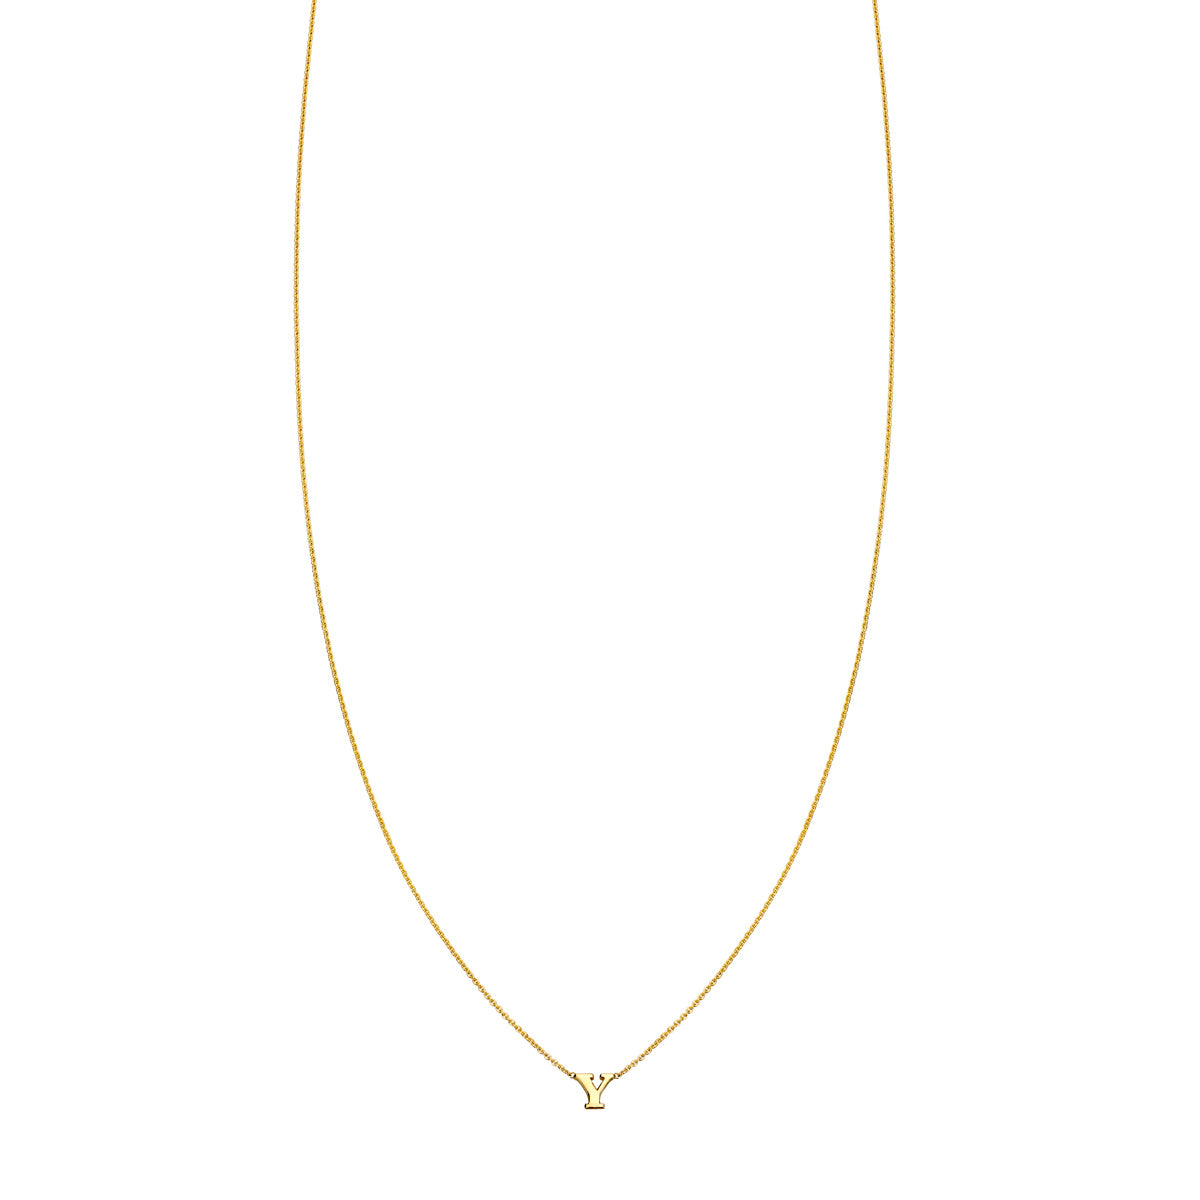 Gold letter necklace with the letter 'Y', personalized style by Phoenix Roze